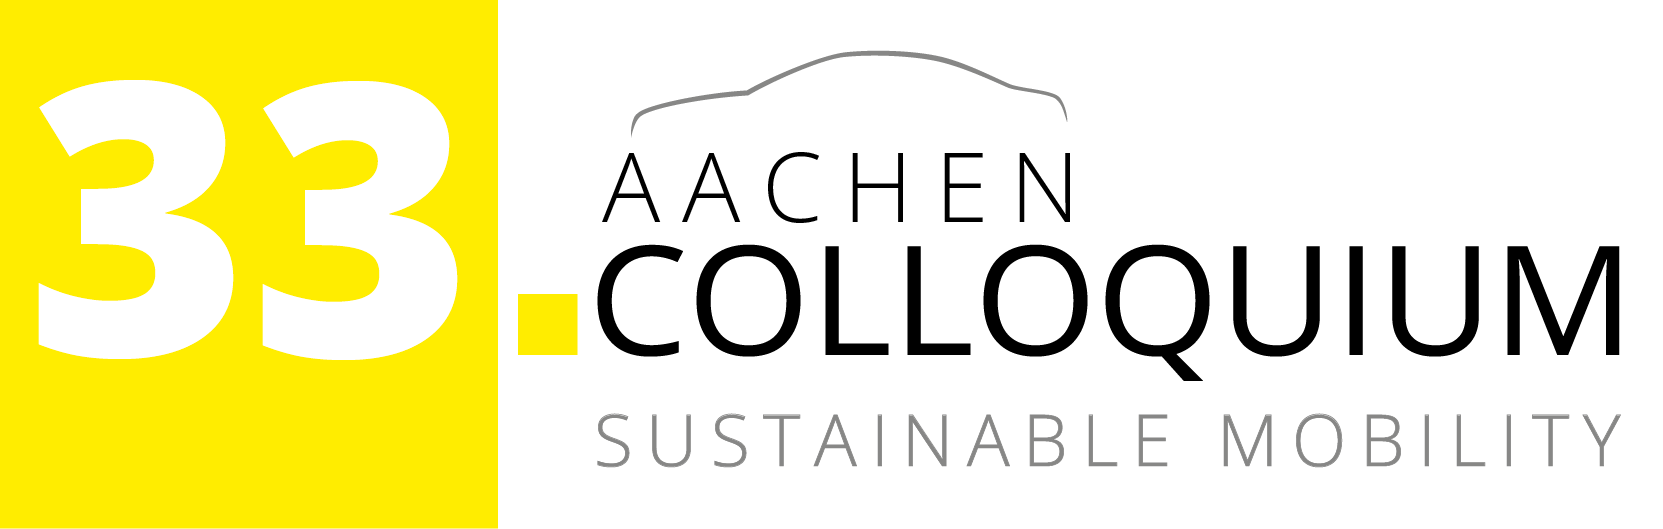 [Image: 33. Aachen Colloquium Sustainable Mobility]